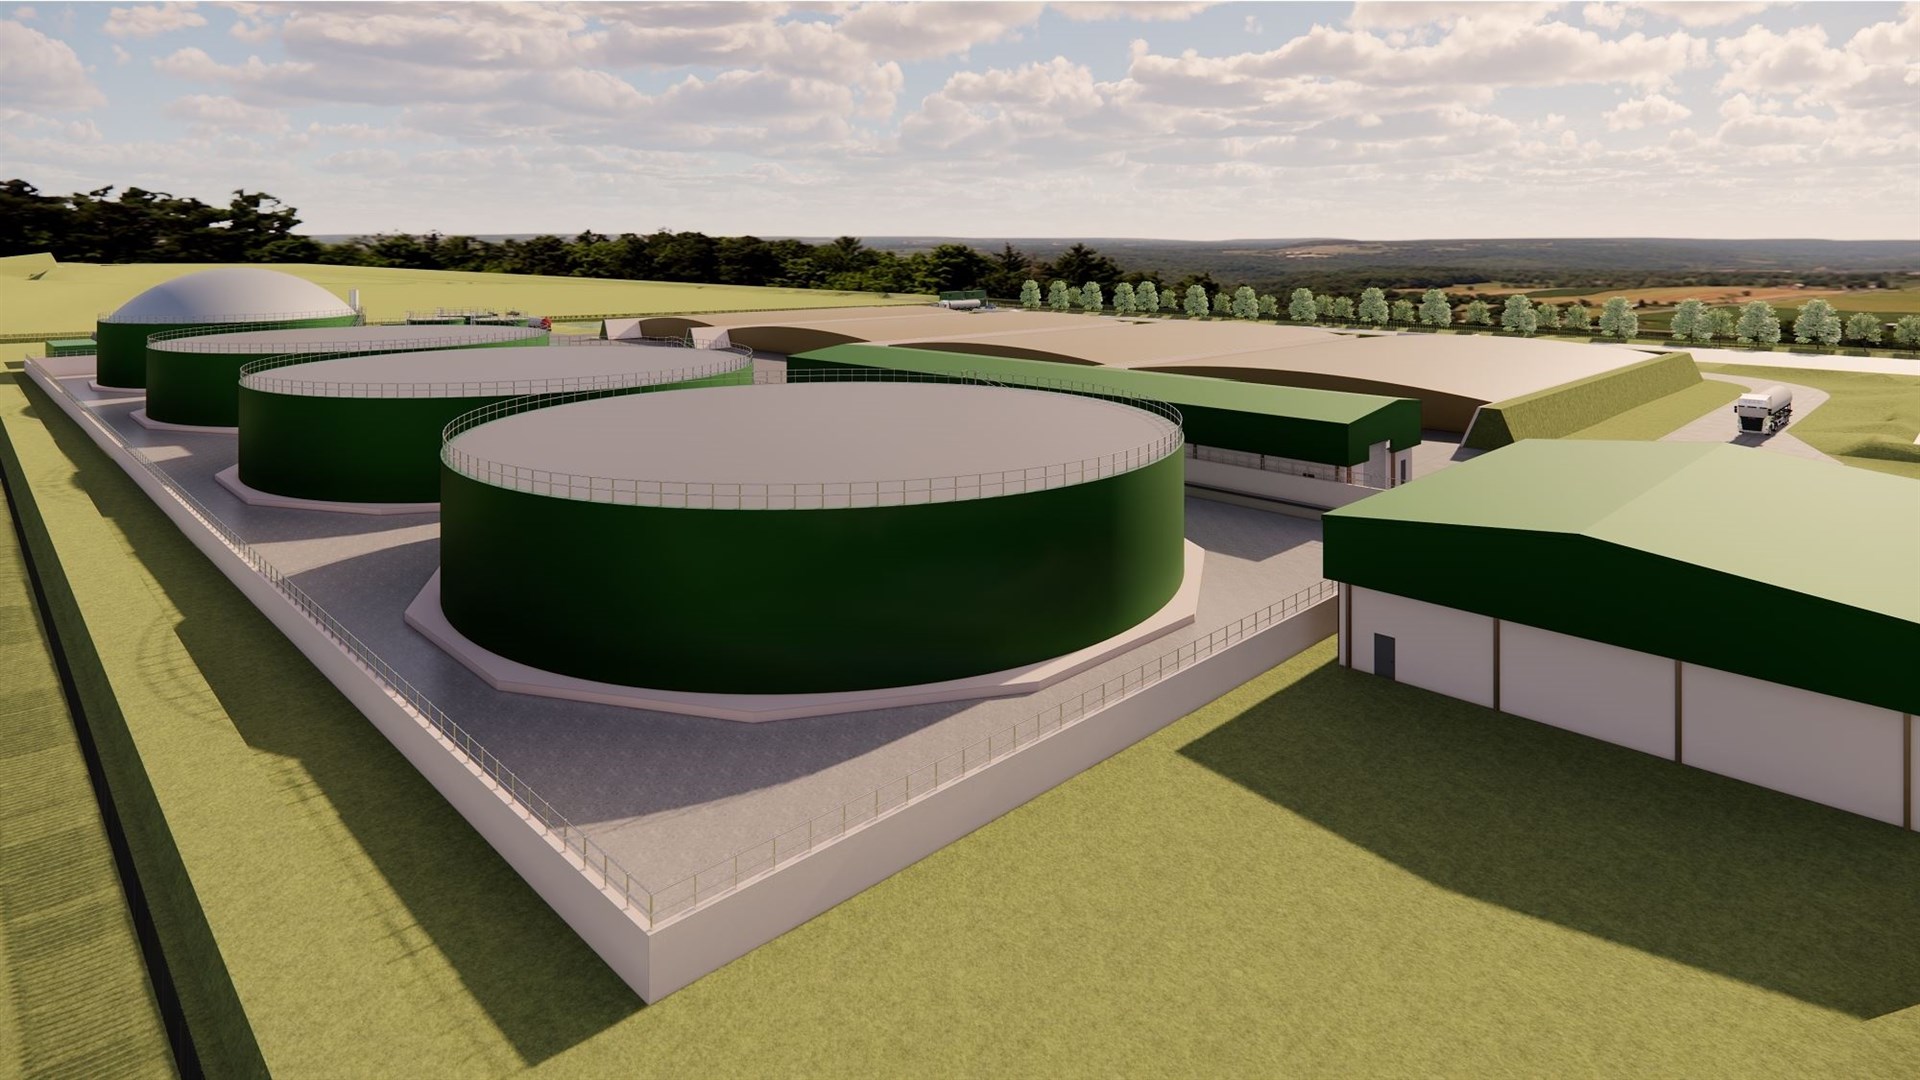 An artist’s impression of the company’s proposed anaerobic digestion plant, at Fearn Airfield in Easter Ross.